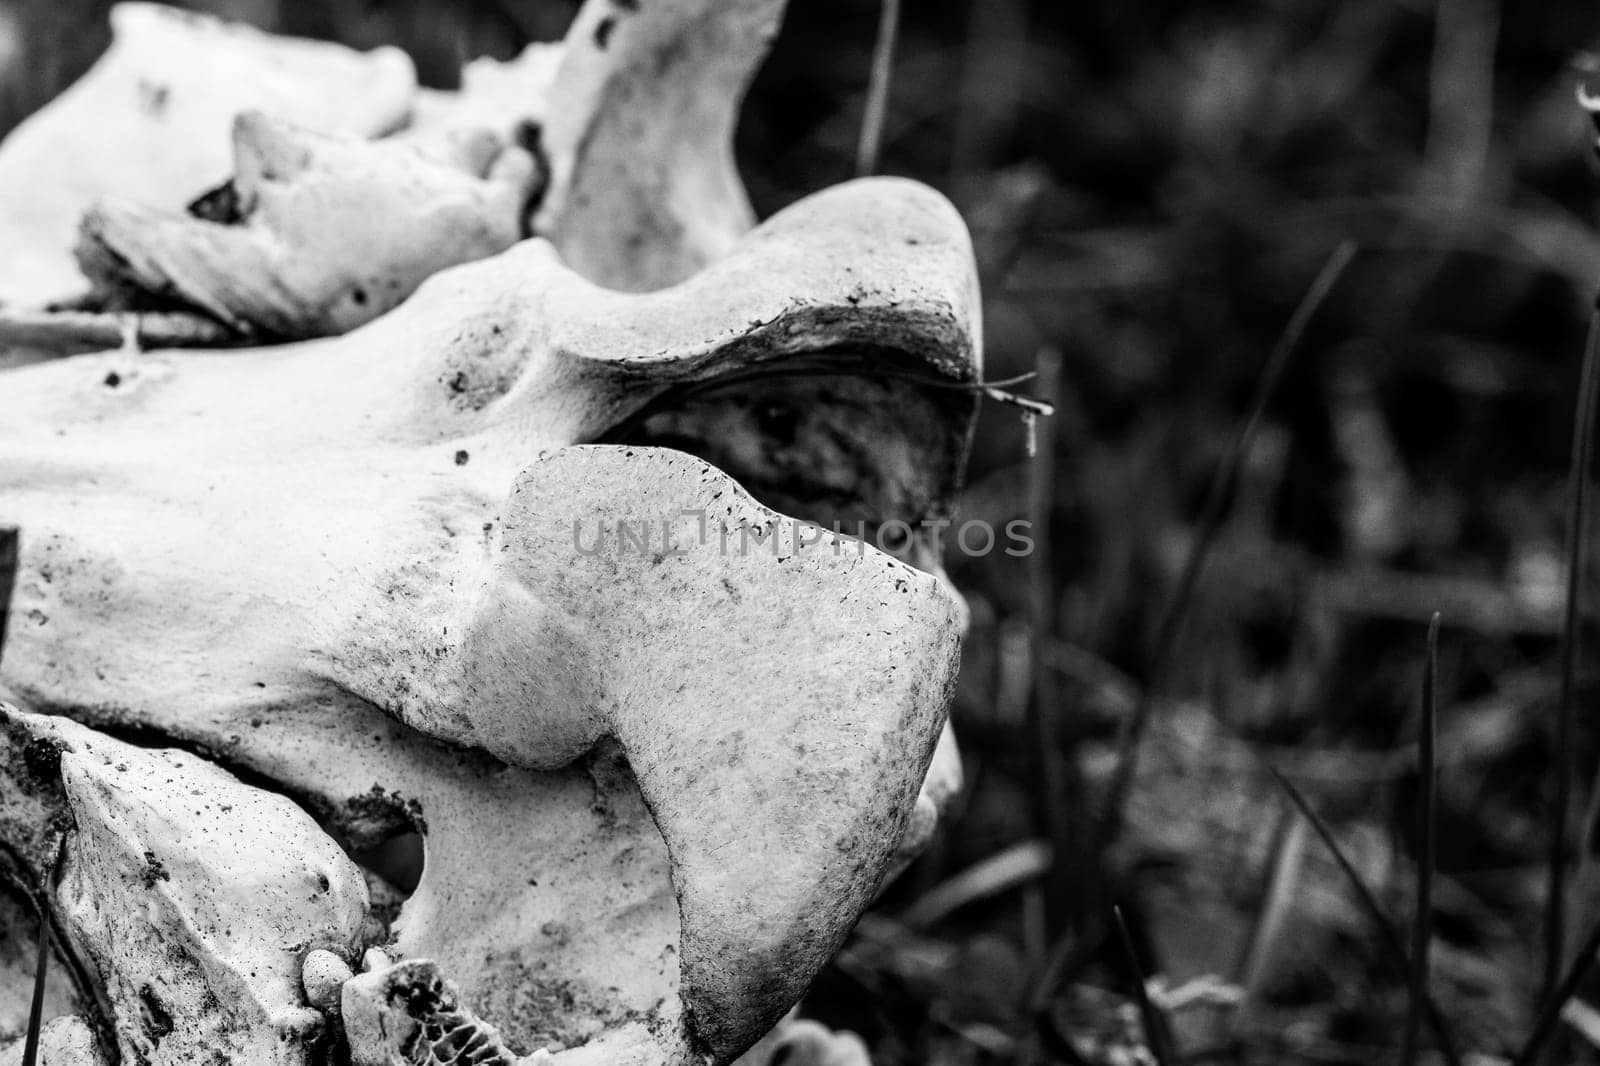 Black and white photo of an old caribou shoulder or hip bone found on the arctic tundra by Granchinho